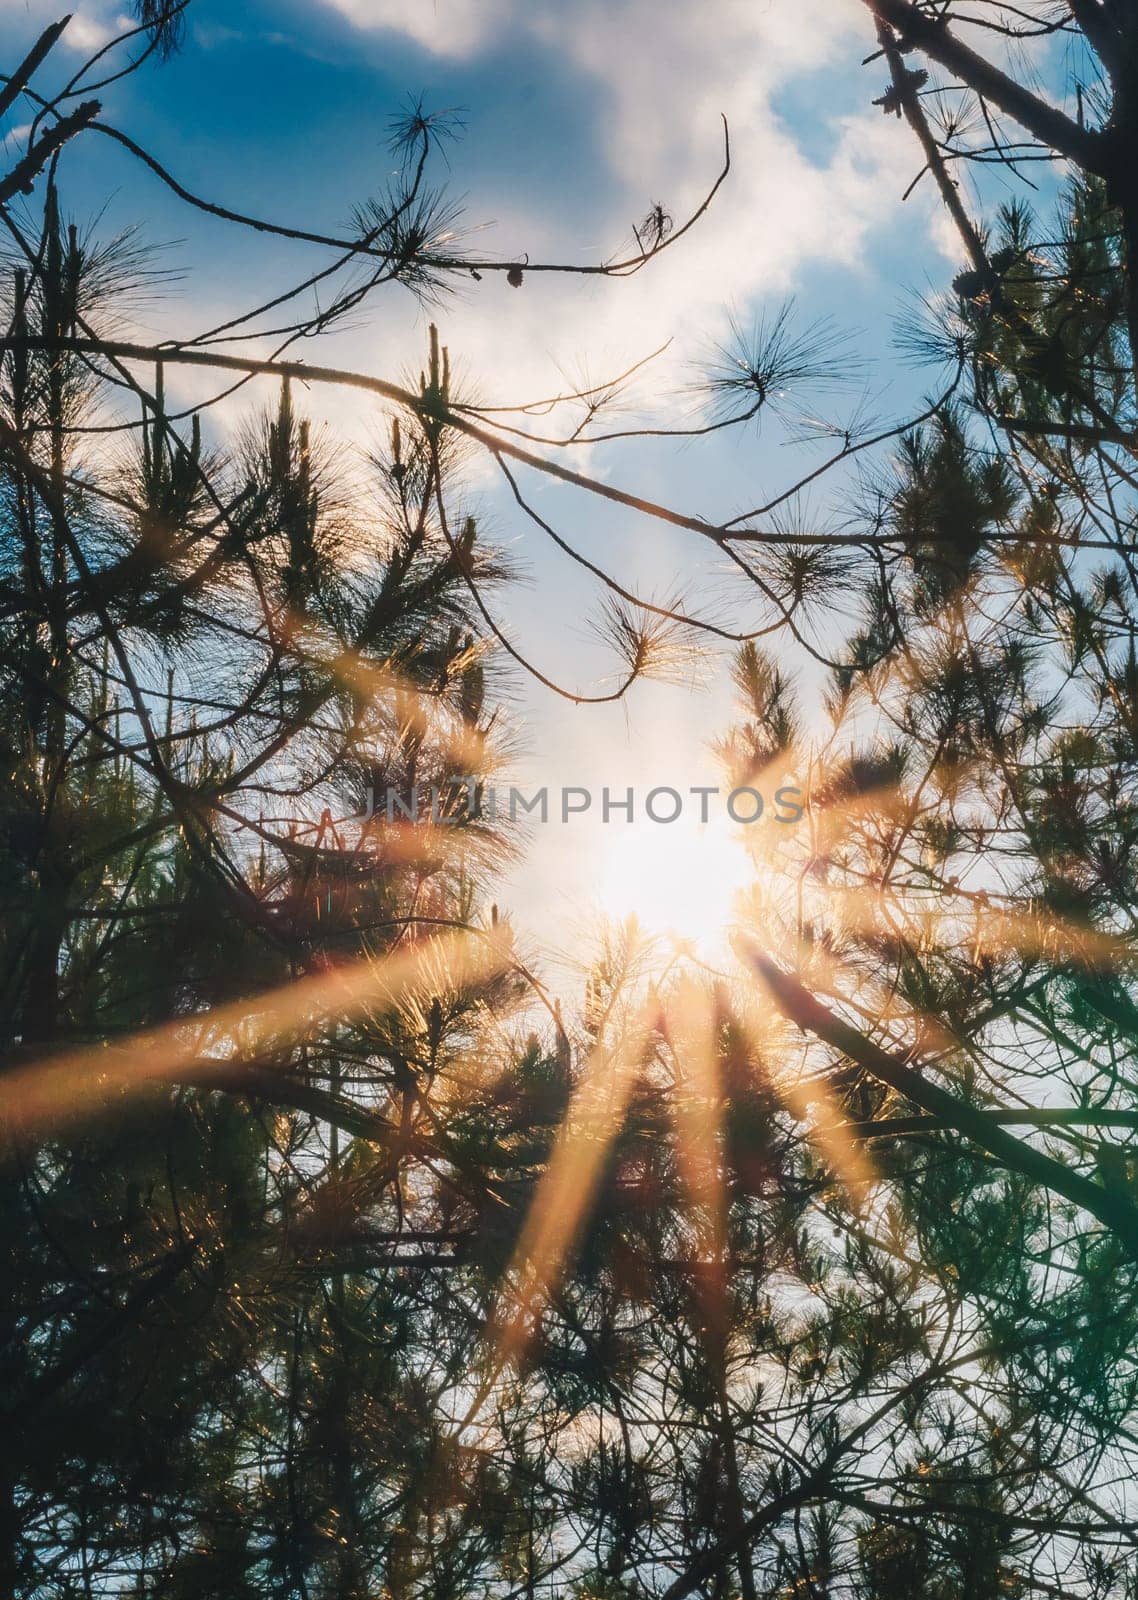 Sun rays through the trees in the PINE forest.